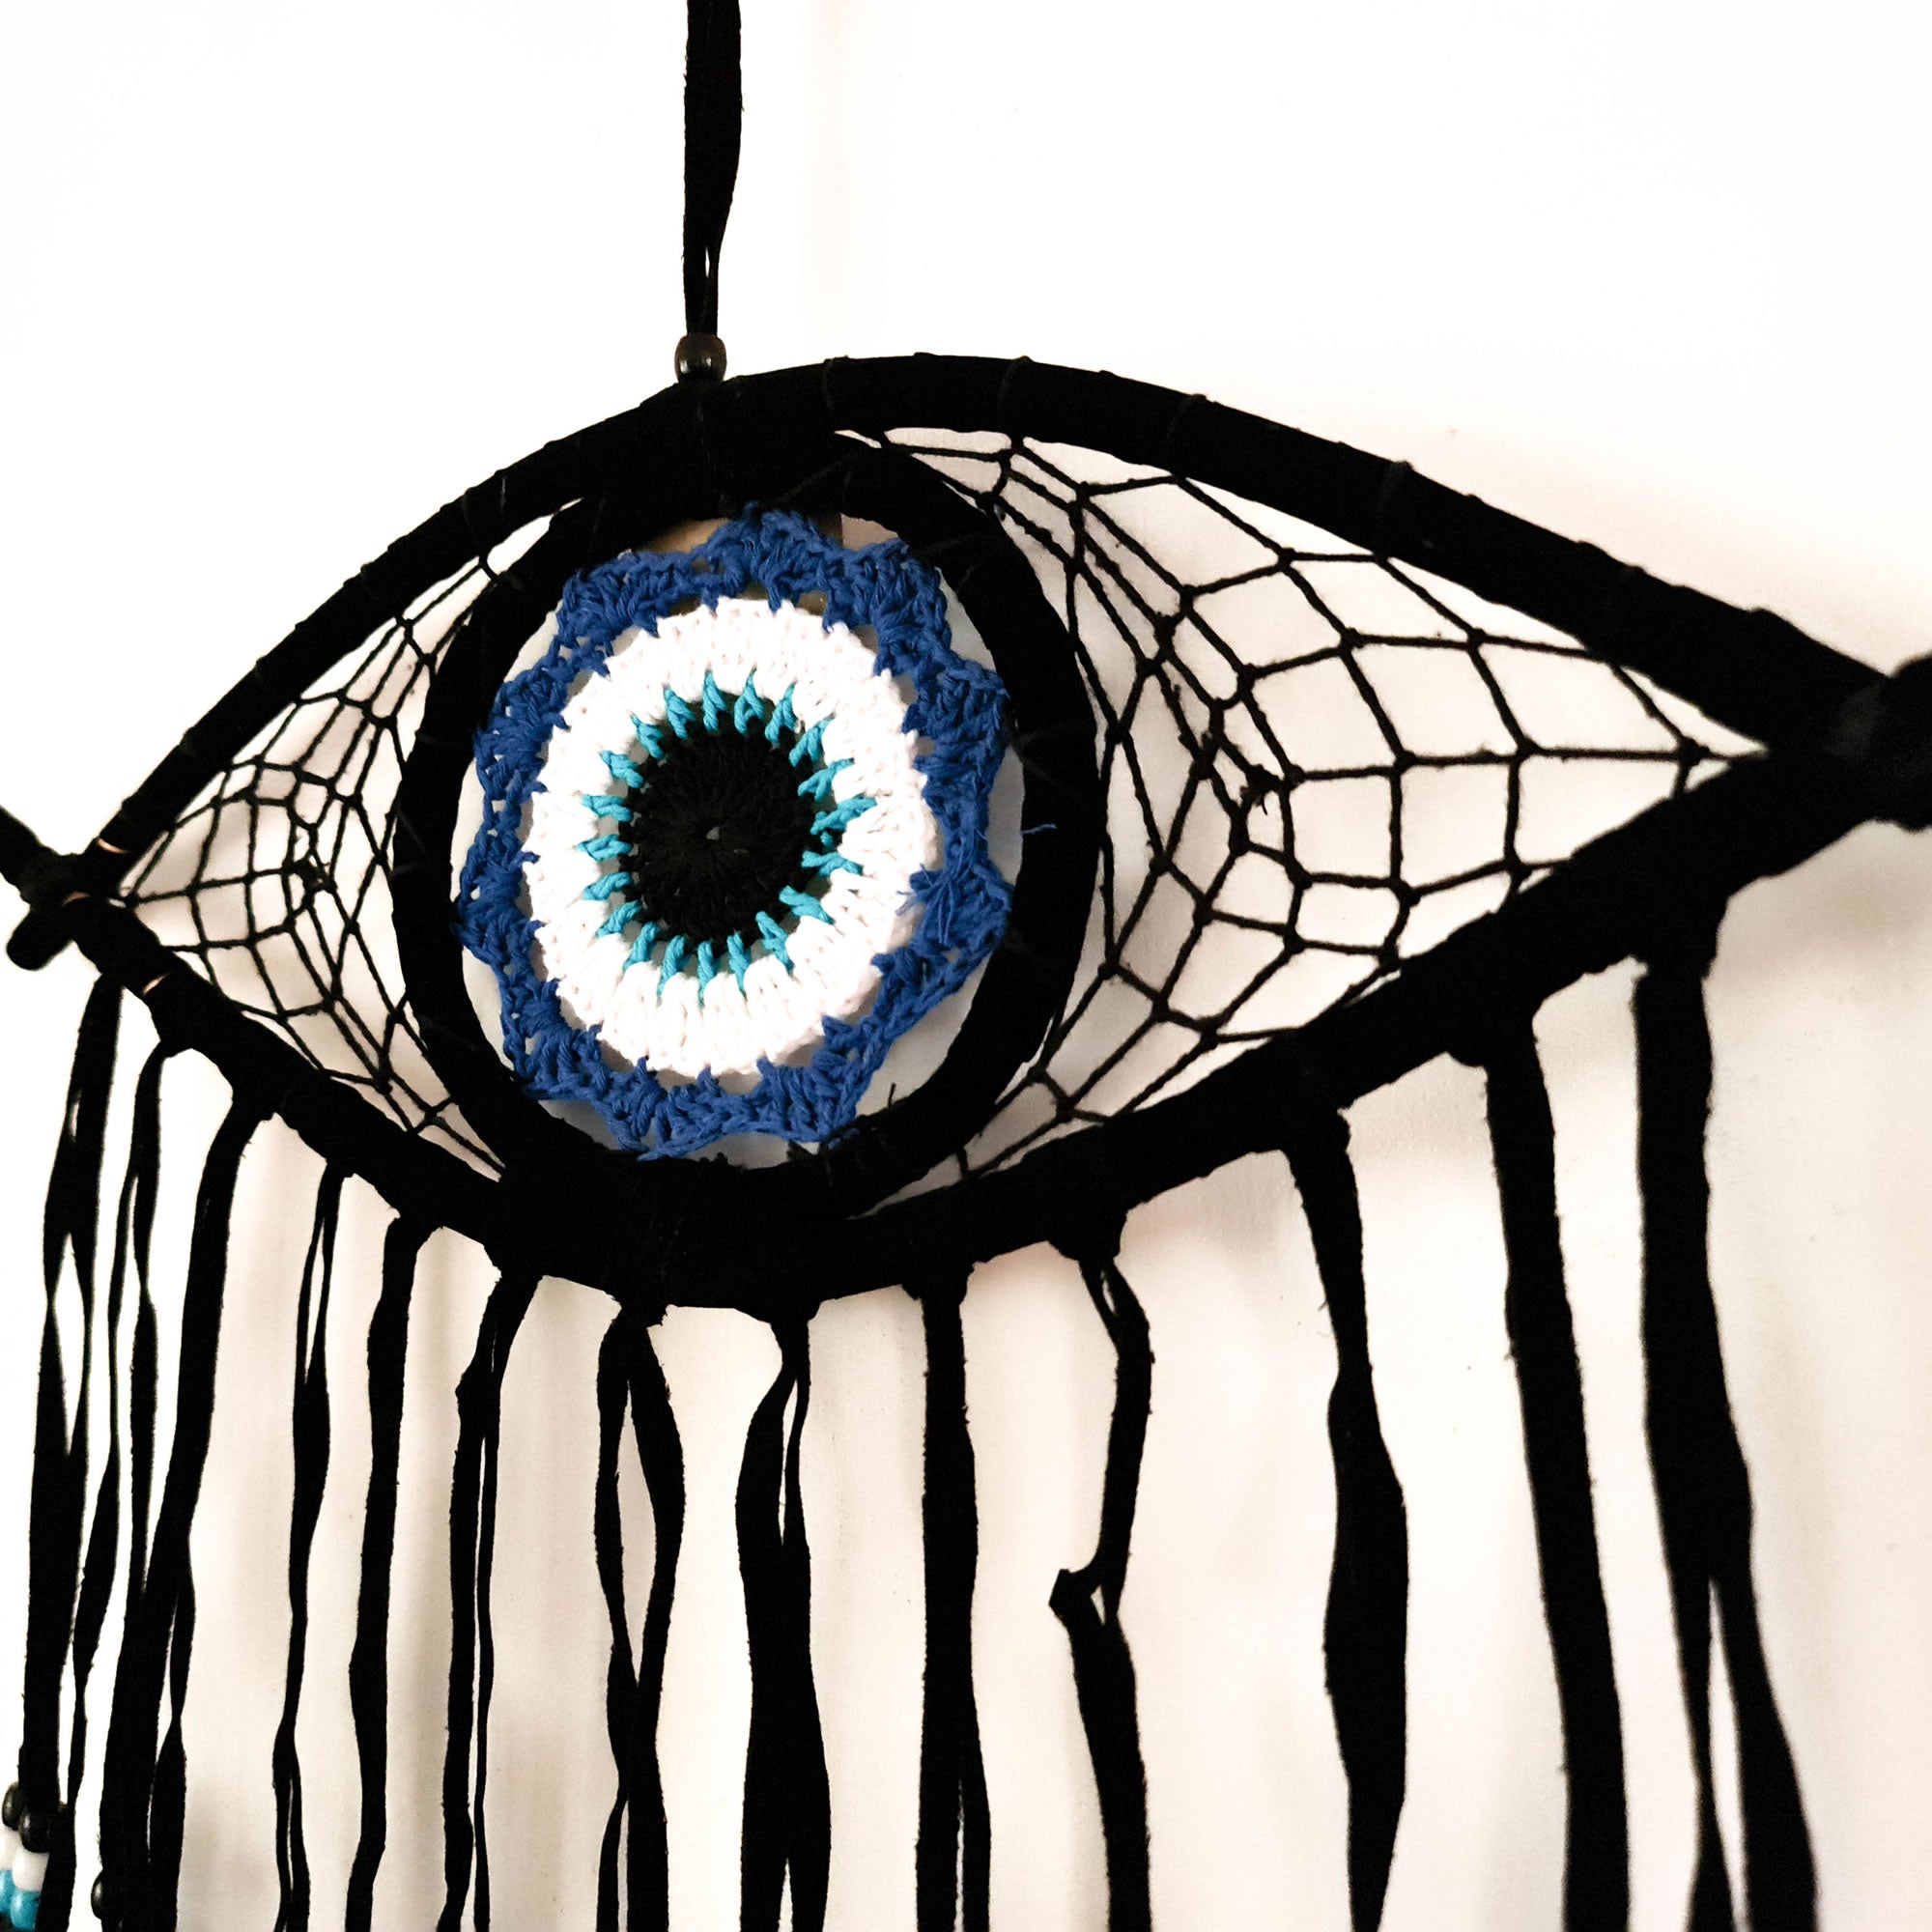 A beautiful Nazar Turkish Evil Eye Handmade Bohemian Macramé Beads Dream Catcher Car Wall Hanging Decoration Art, a perfect gift. A unique piece with subtle colors and beads to give an elegant touch.